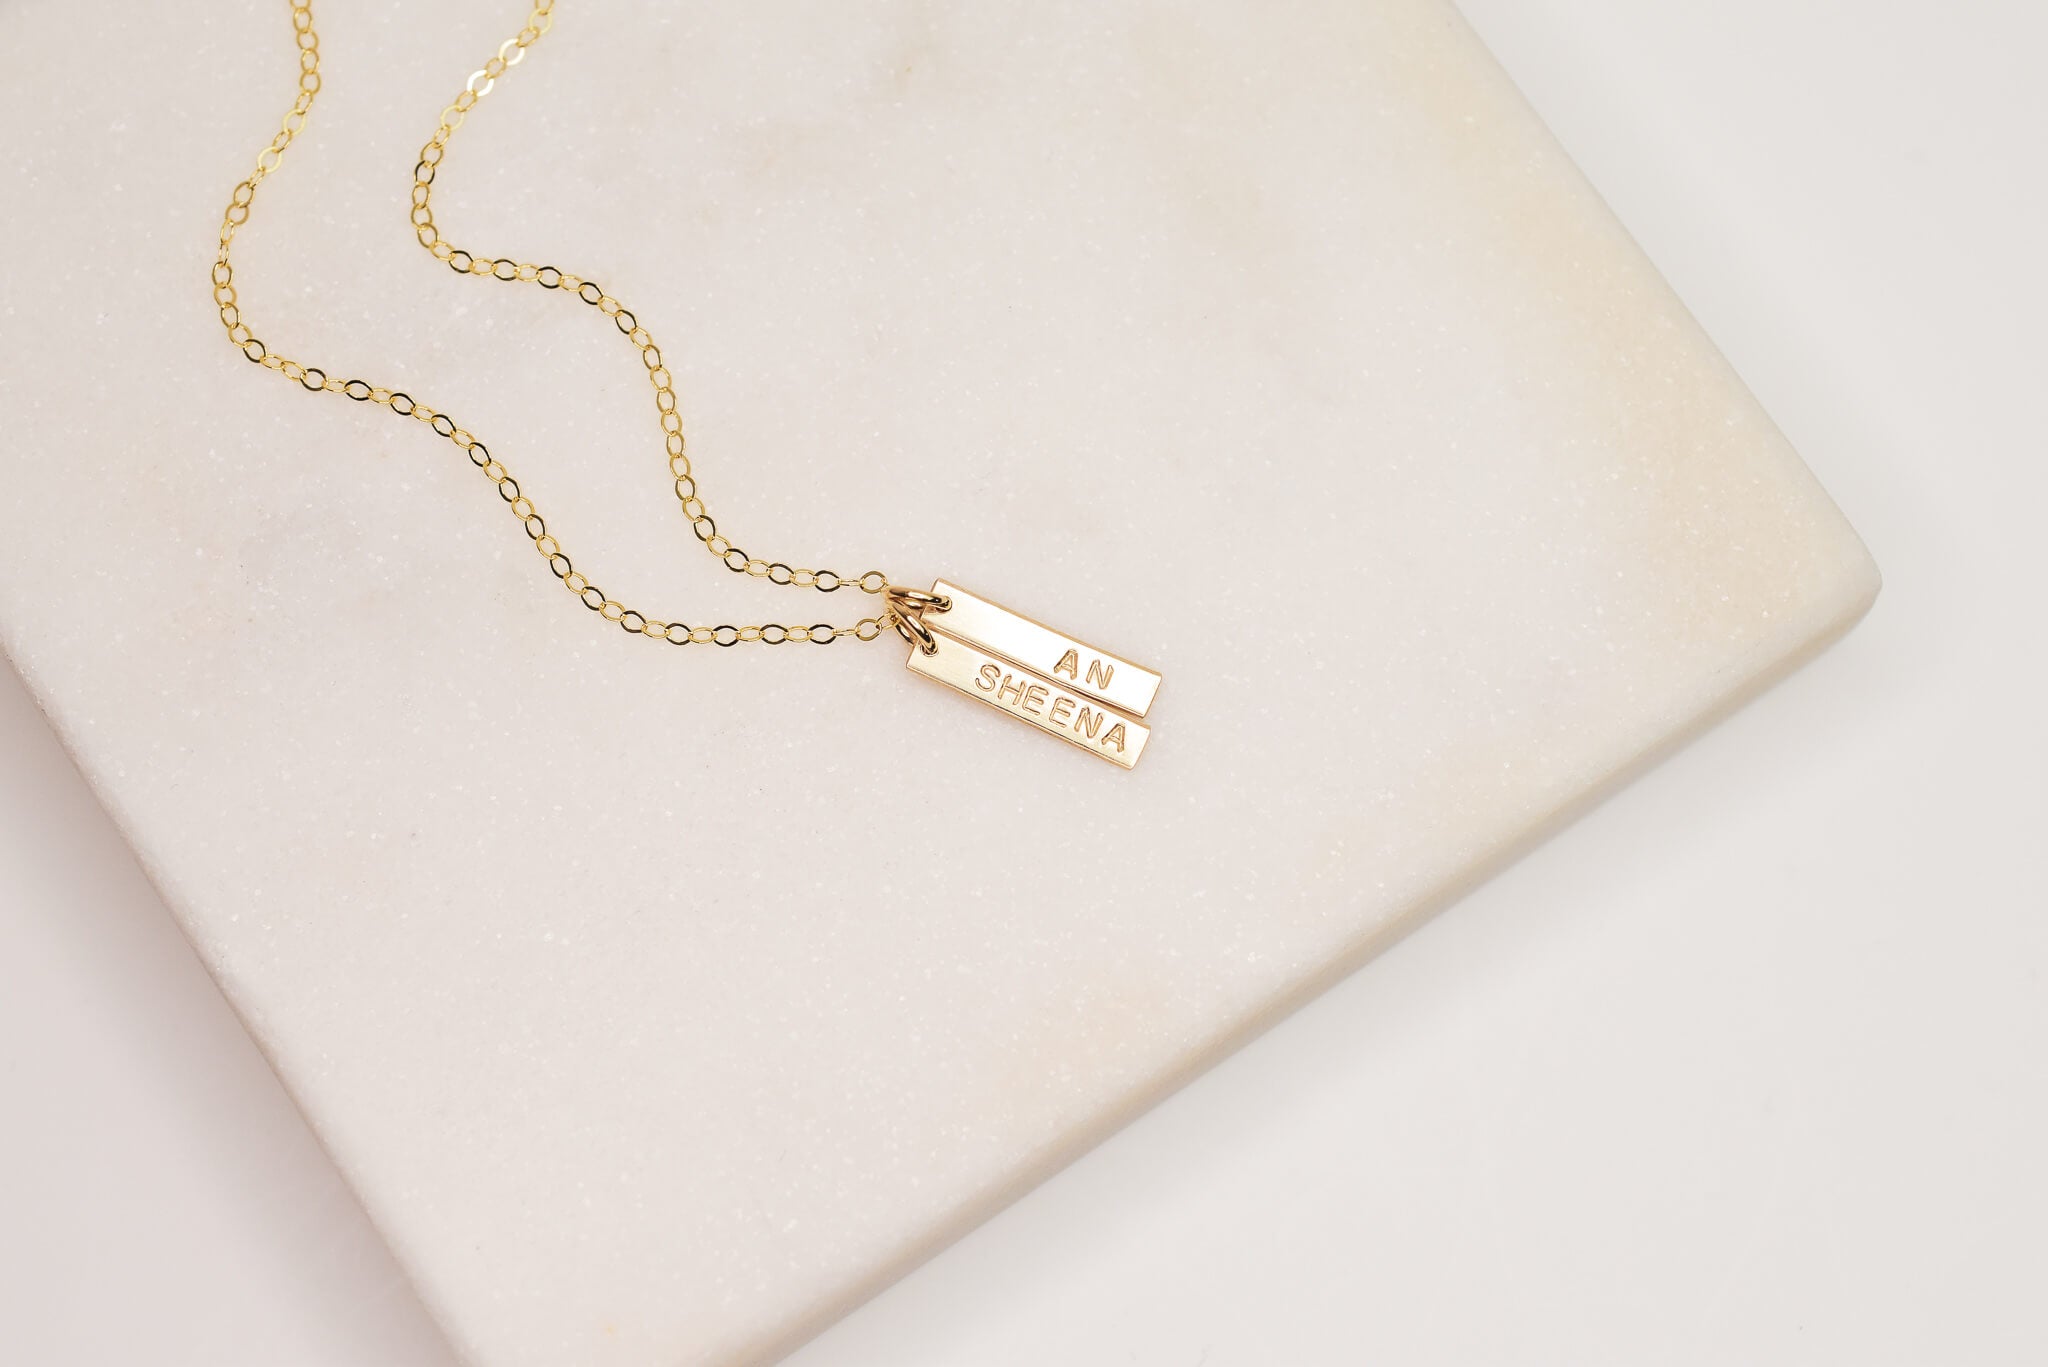 6 Personalized Jewelry Gifts for Mother's Day